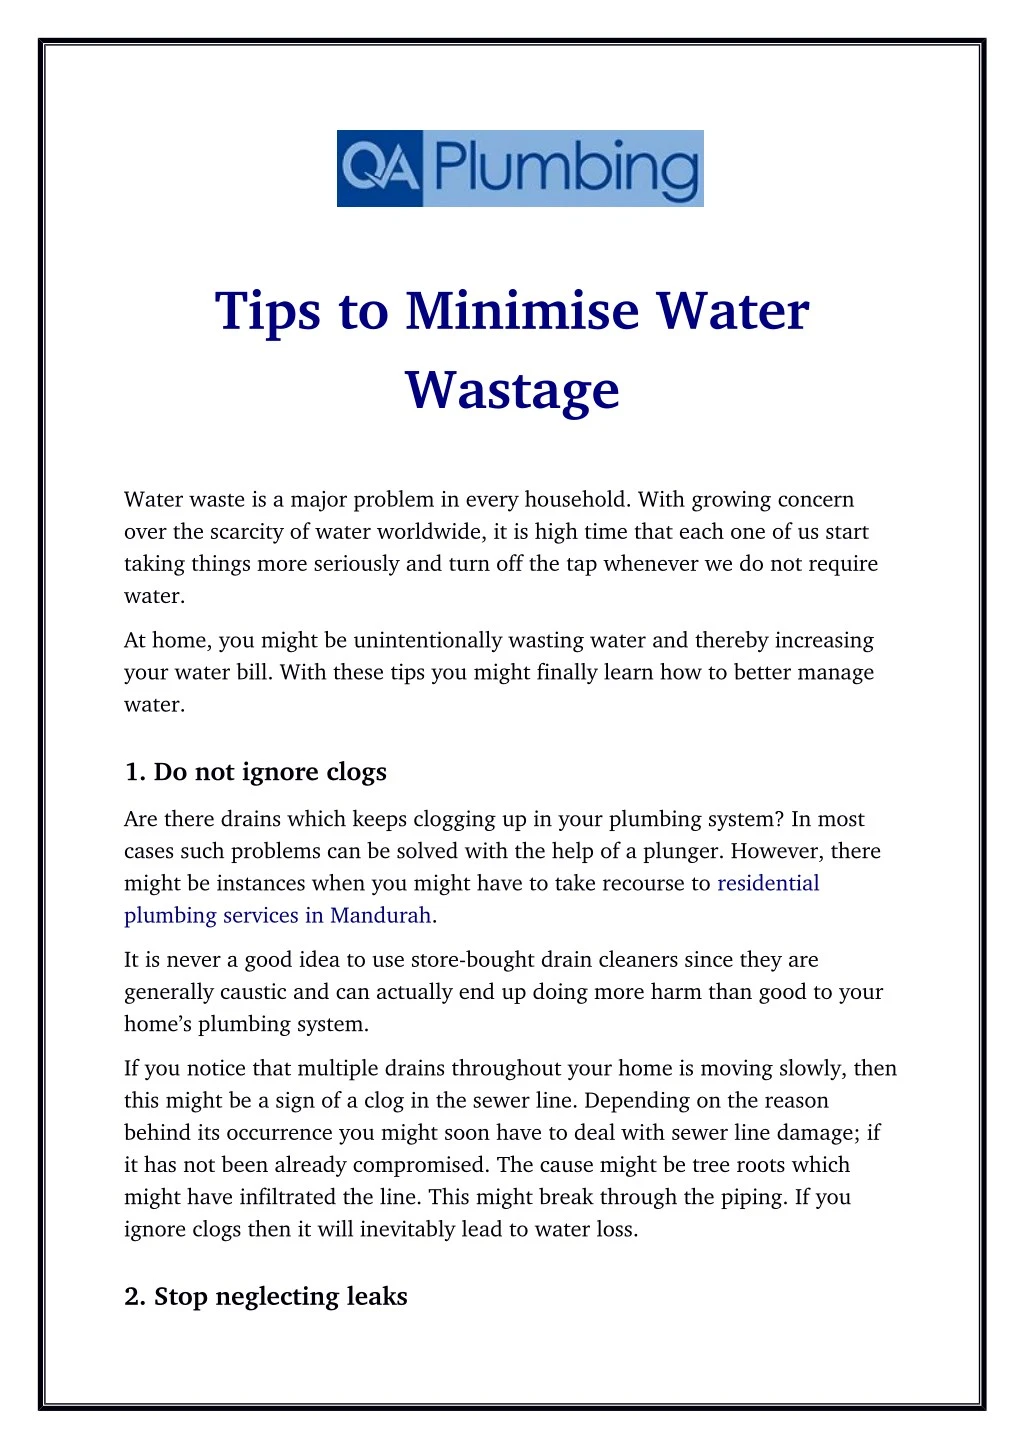 tips to minimise water wastage